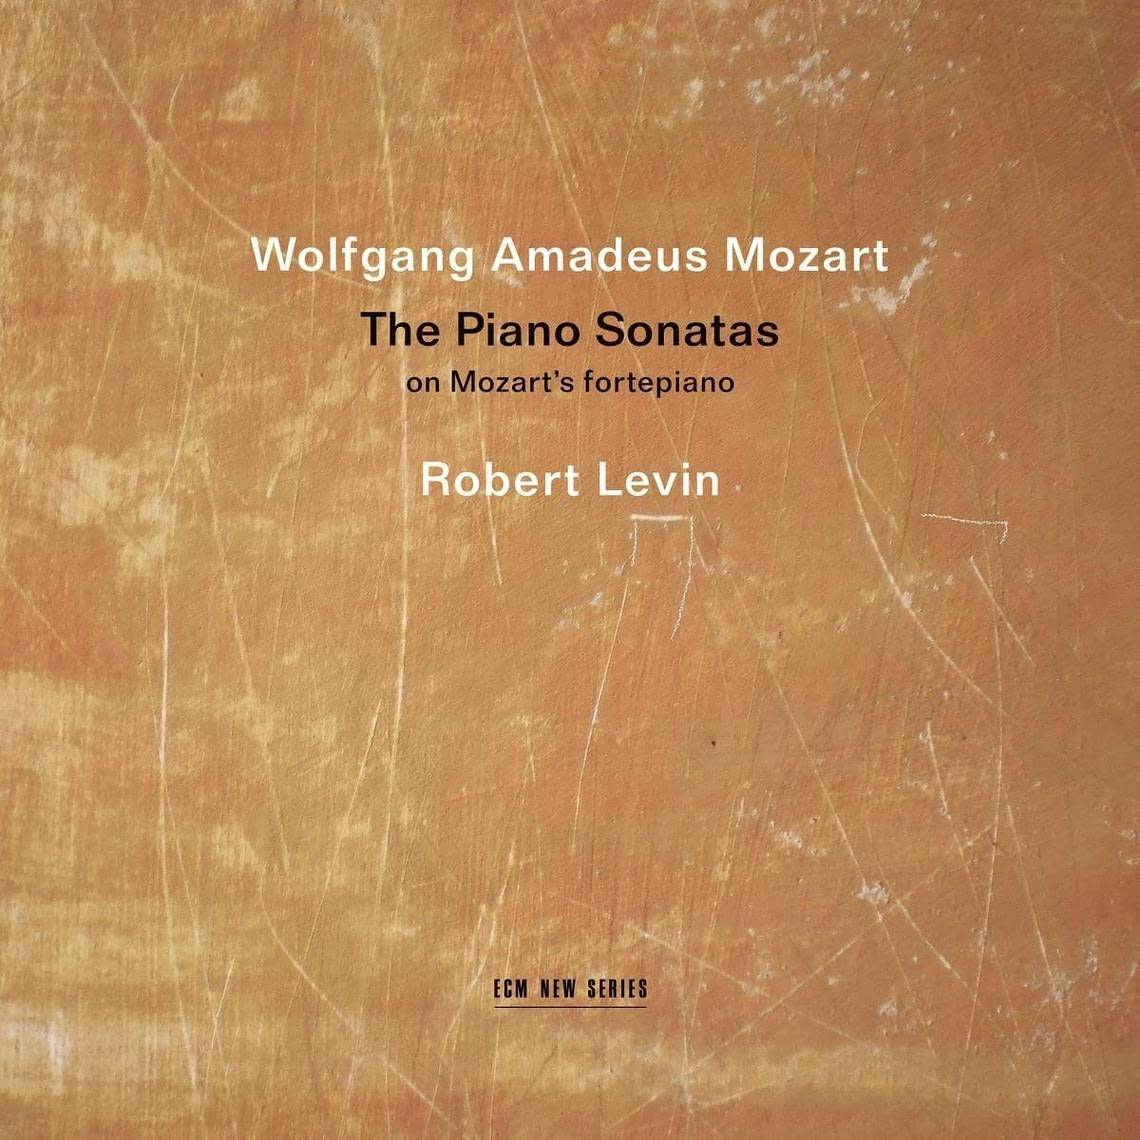 Robert Levin plays on Mozart’s own fortepiano on this box set.